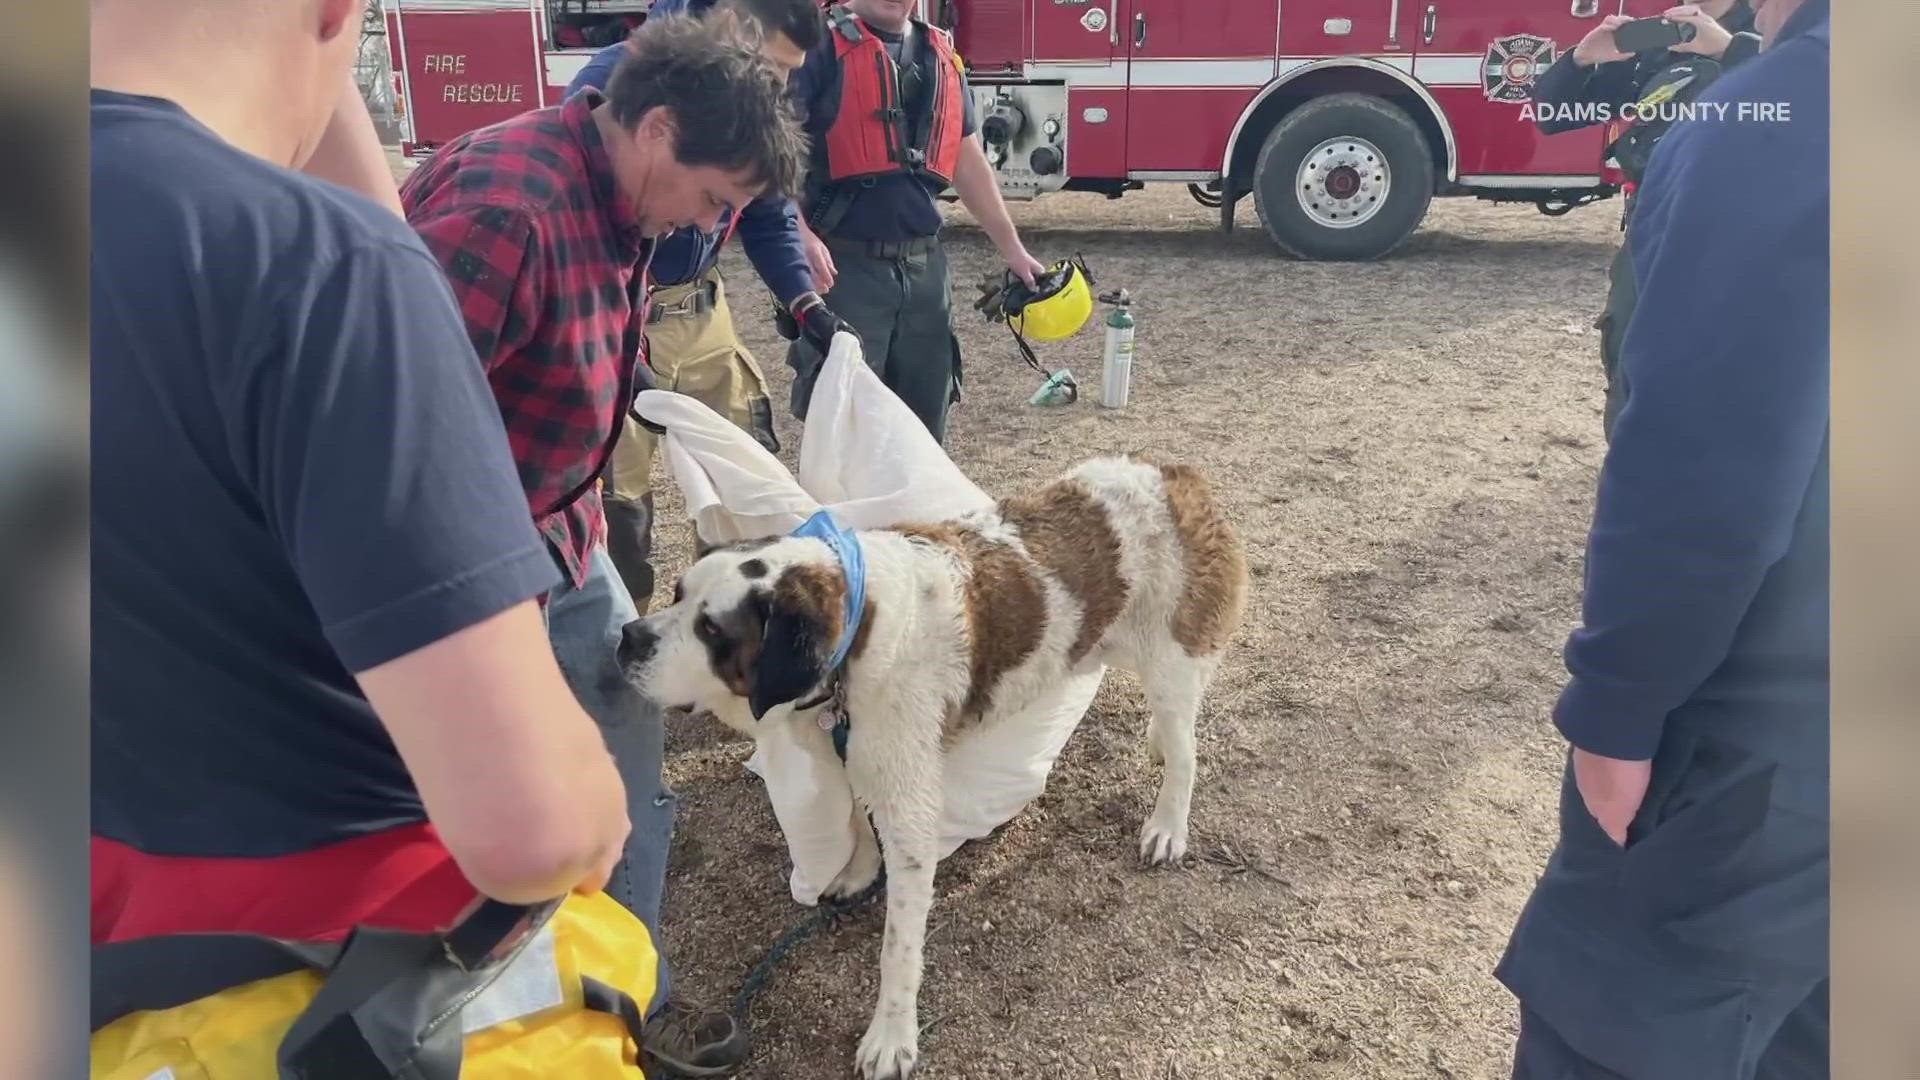 The 155-pound St. Bernard is doing fine after being pulled from the icy water Saturday.